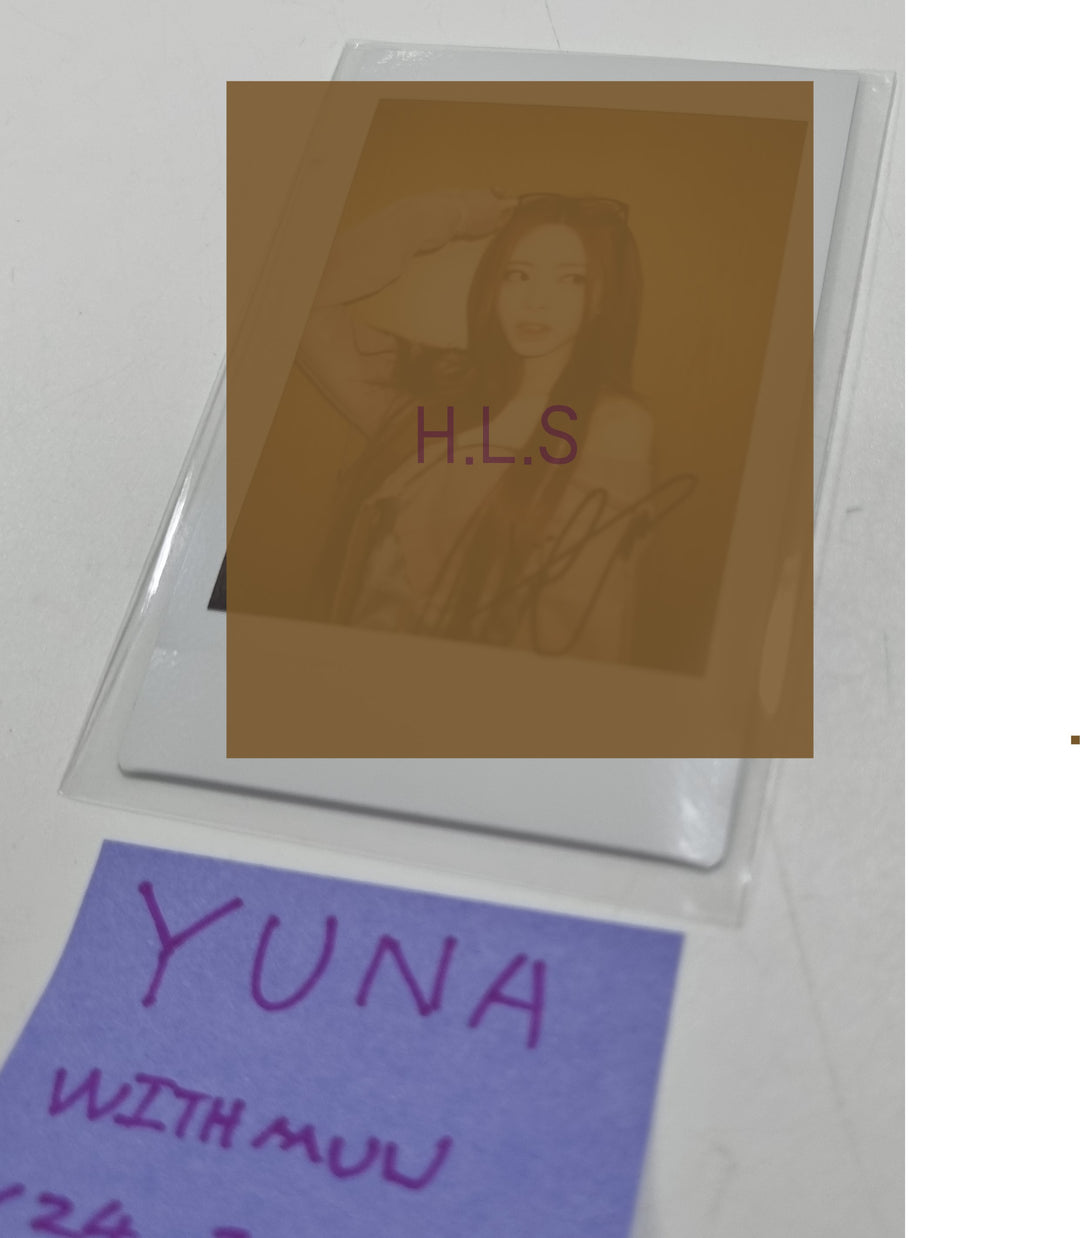 Yuna (Of ITZY) 'BORN TO BE' - Hand Autographed(Signed) Polaroid [24.3.13]